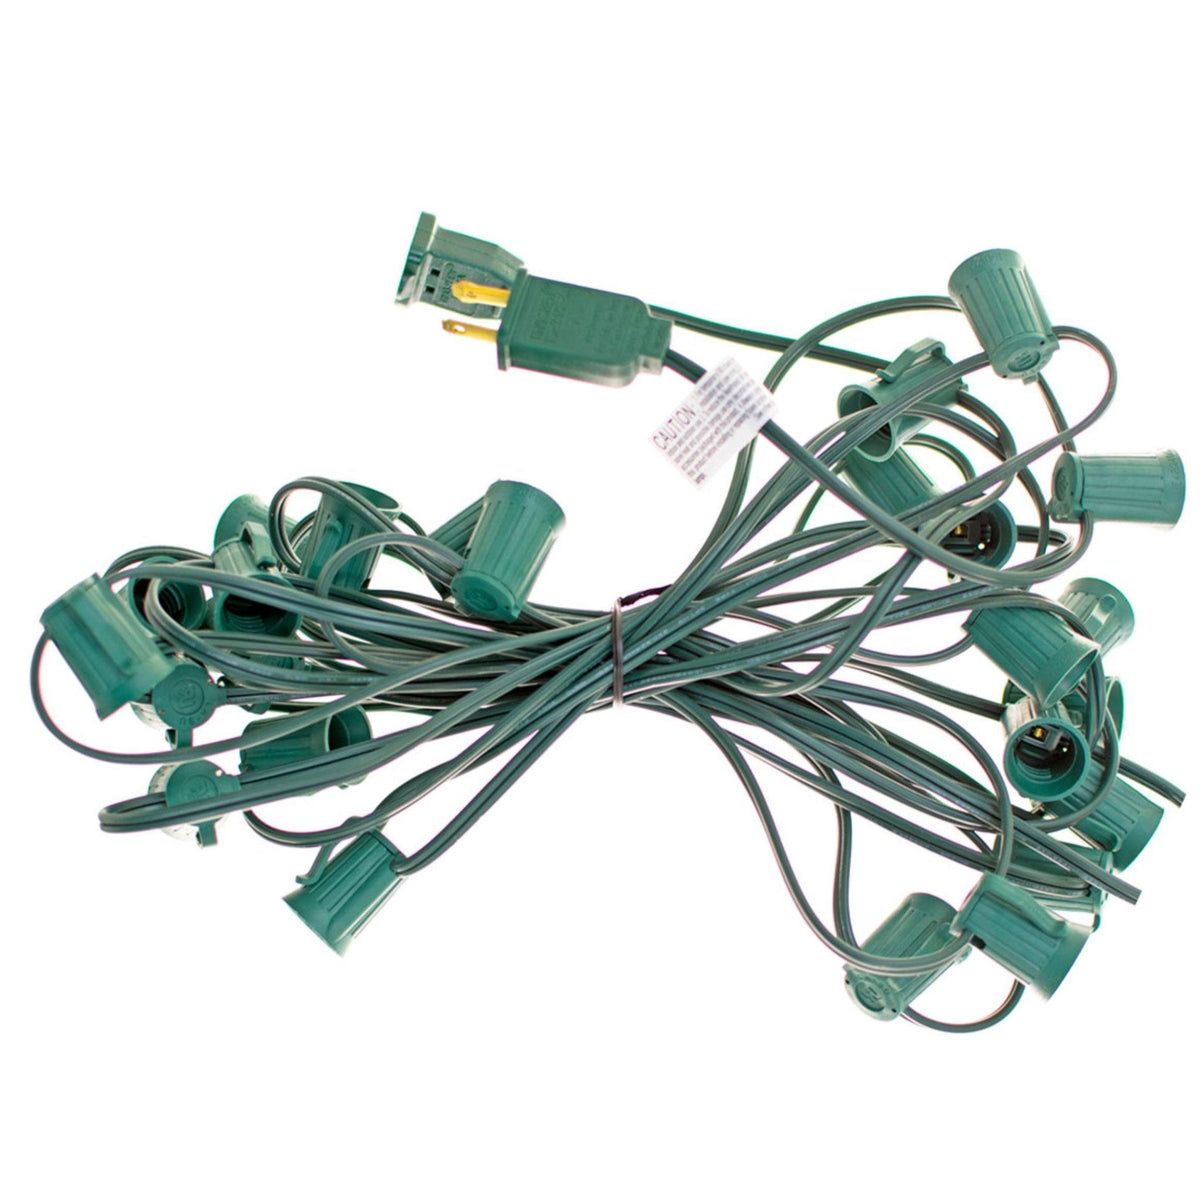 Patio String Light Cords are sold in 25FT - 50FT Lengths.  Custom length cords fit every size patio and backyard!   Shop for Green and White Wire Sets now at leedisplay.com